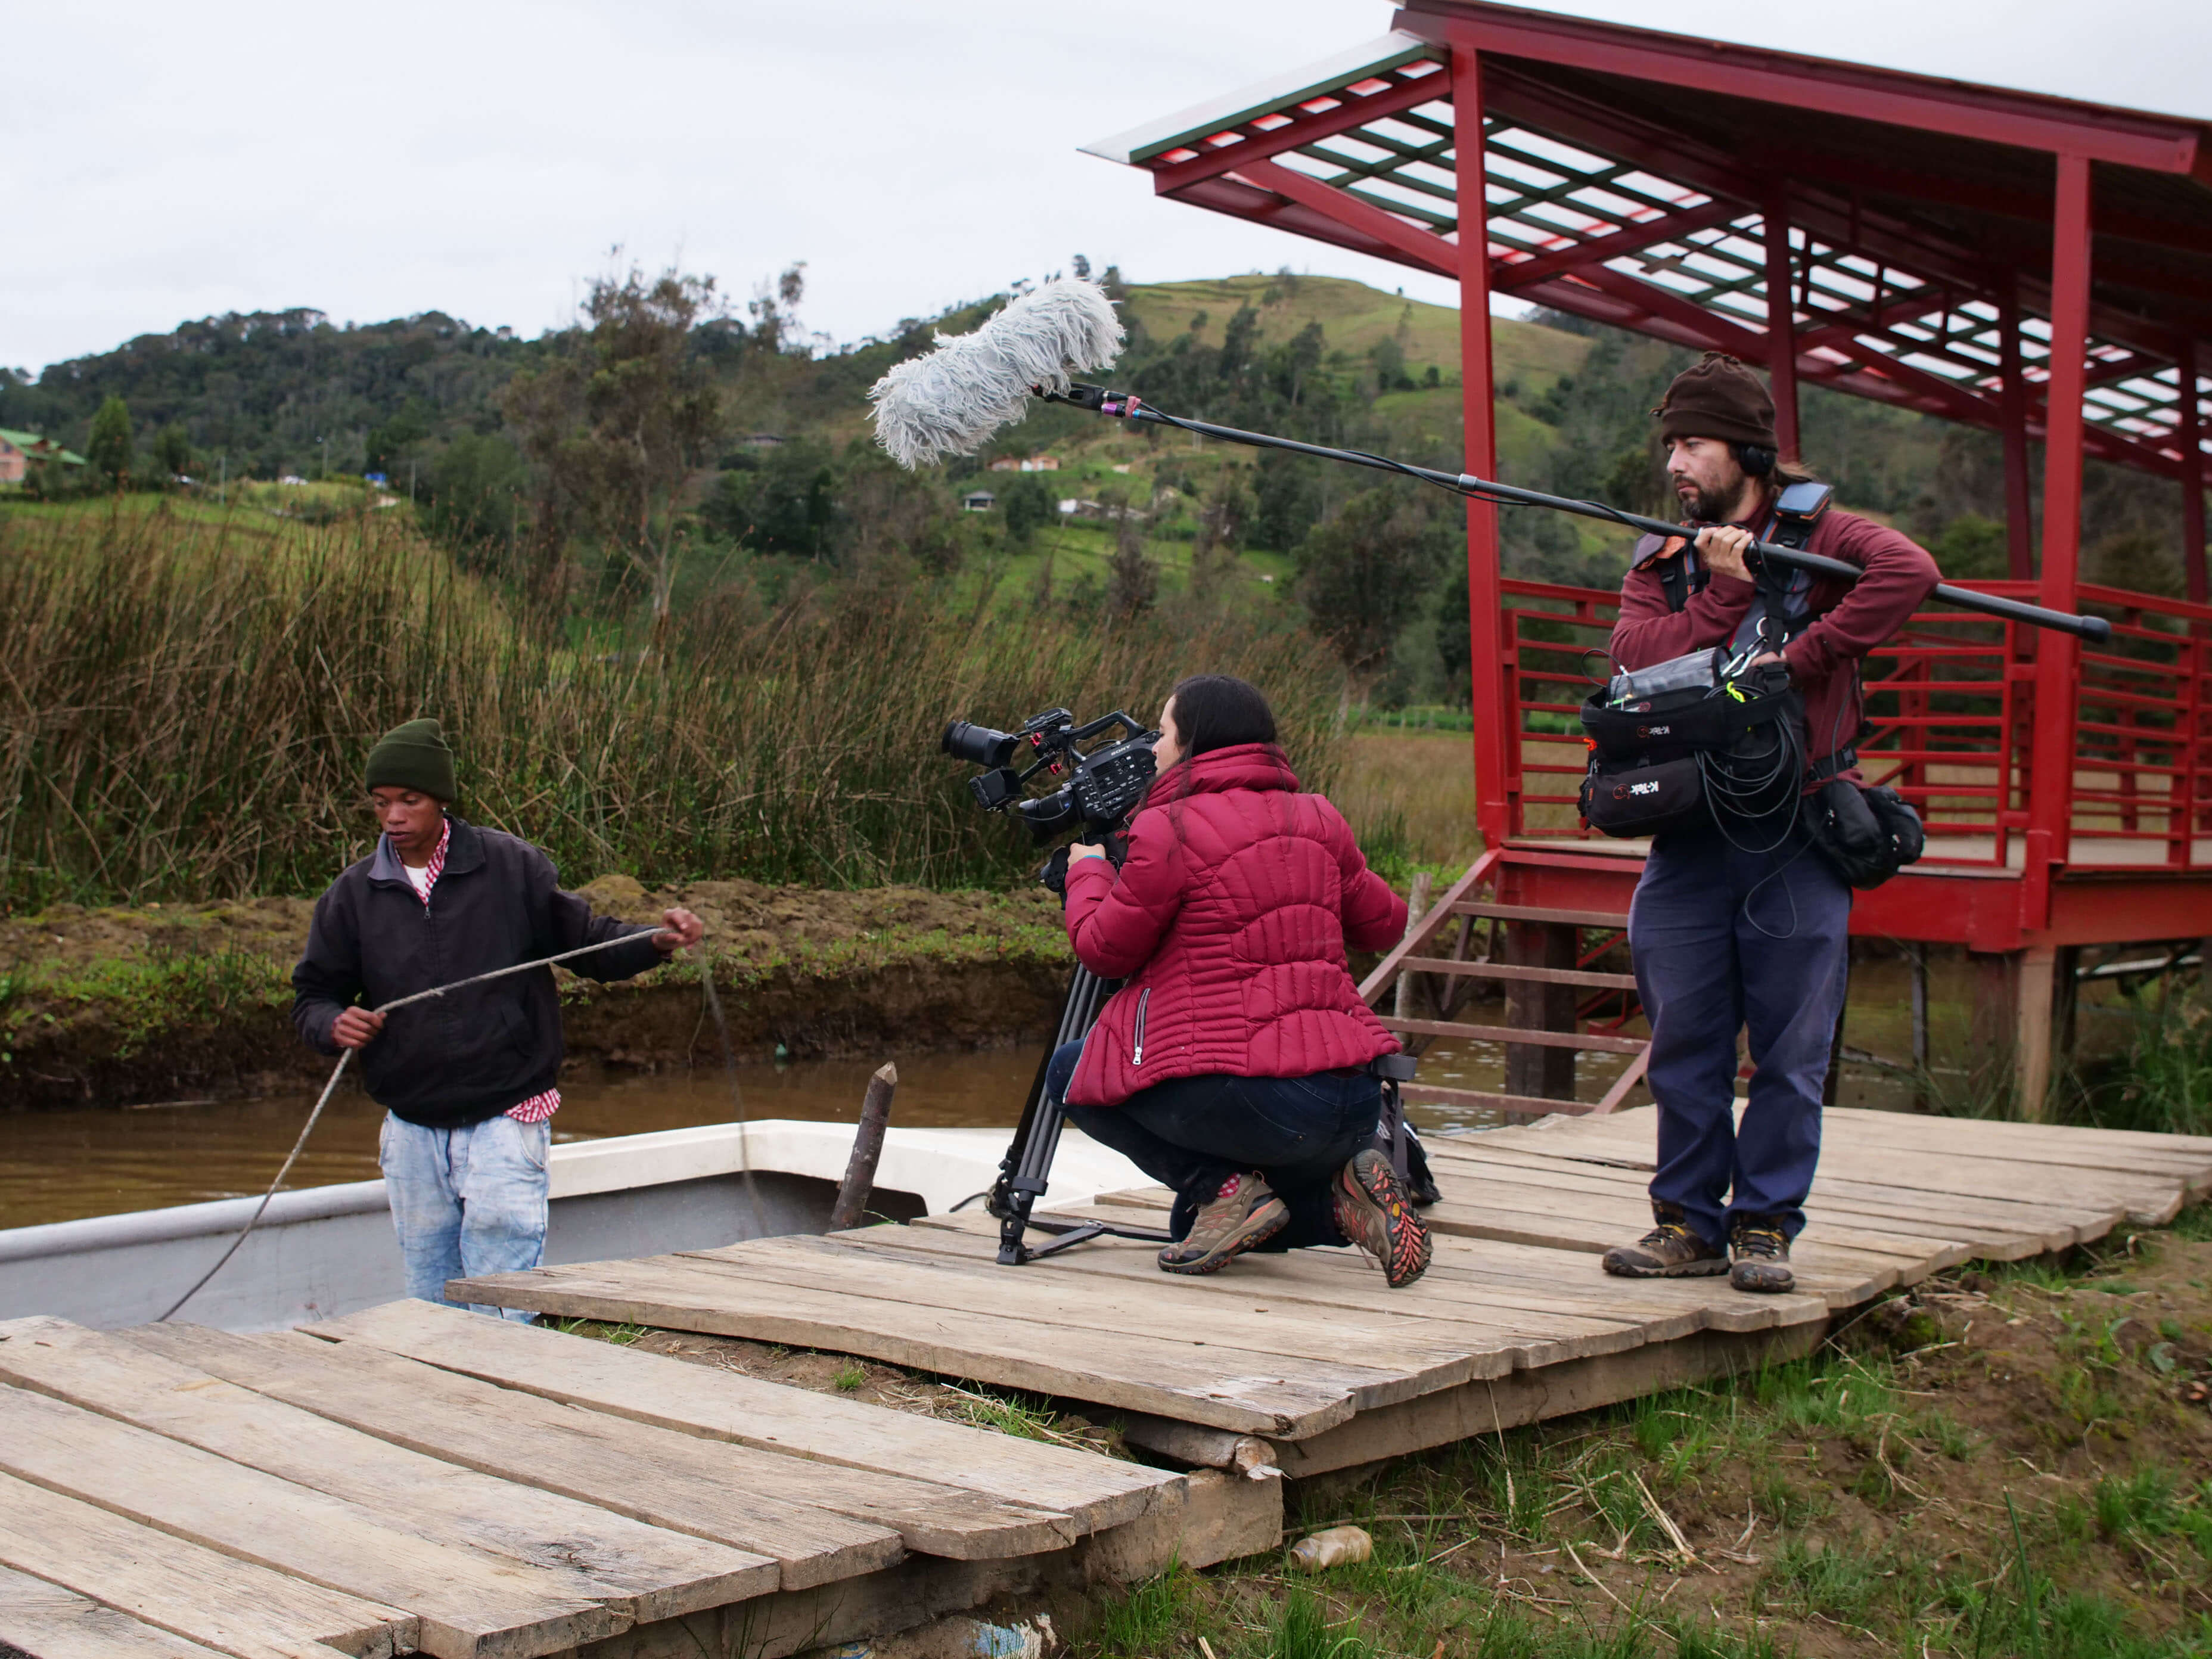 Production still of Paths of Fire. Filmmaker Viviana Gómez Echeverry is working with a camera and with a sound crew person. They are filming a man working on a boat.